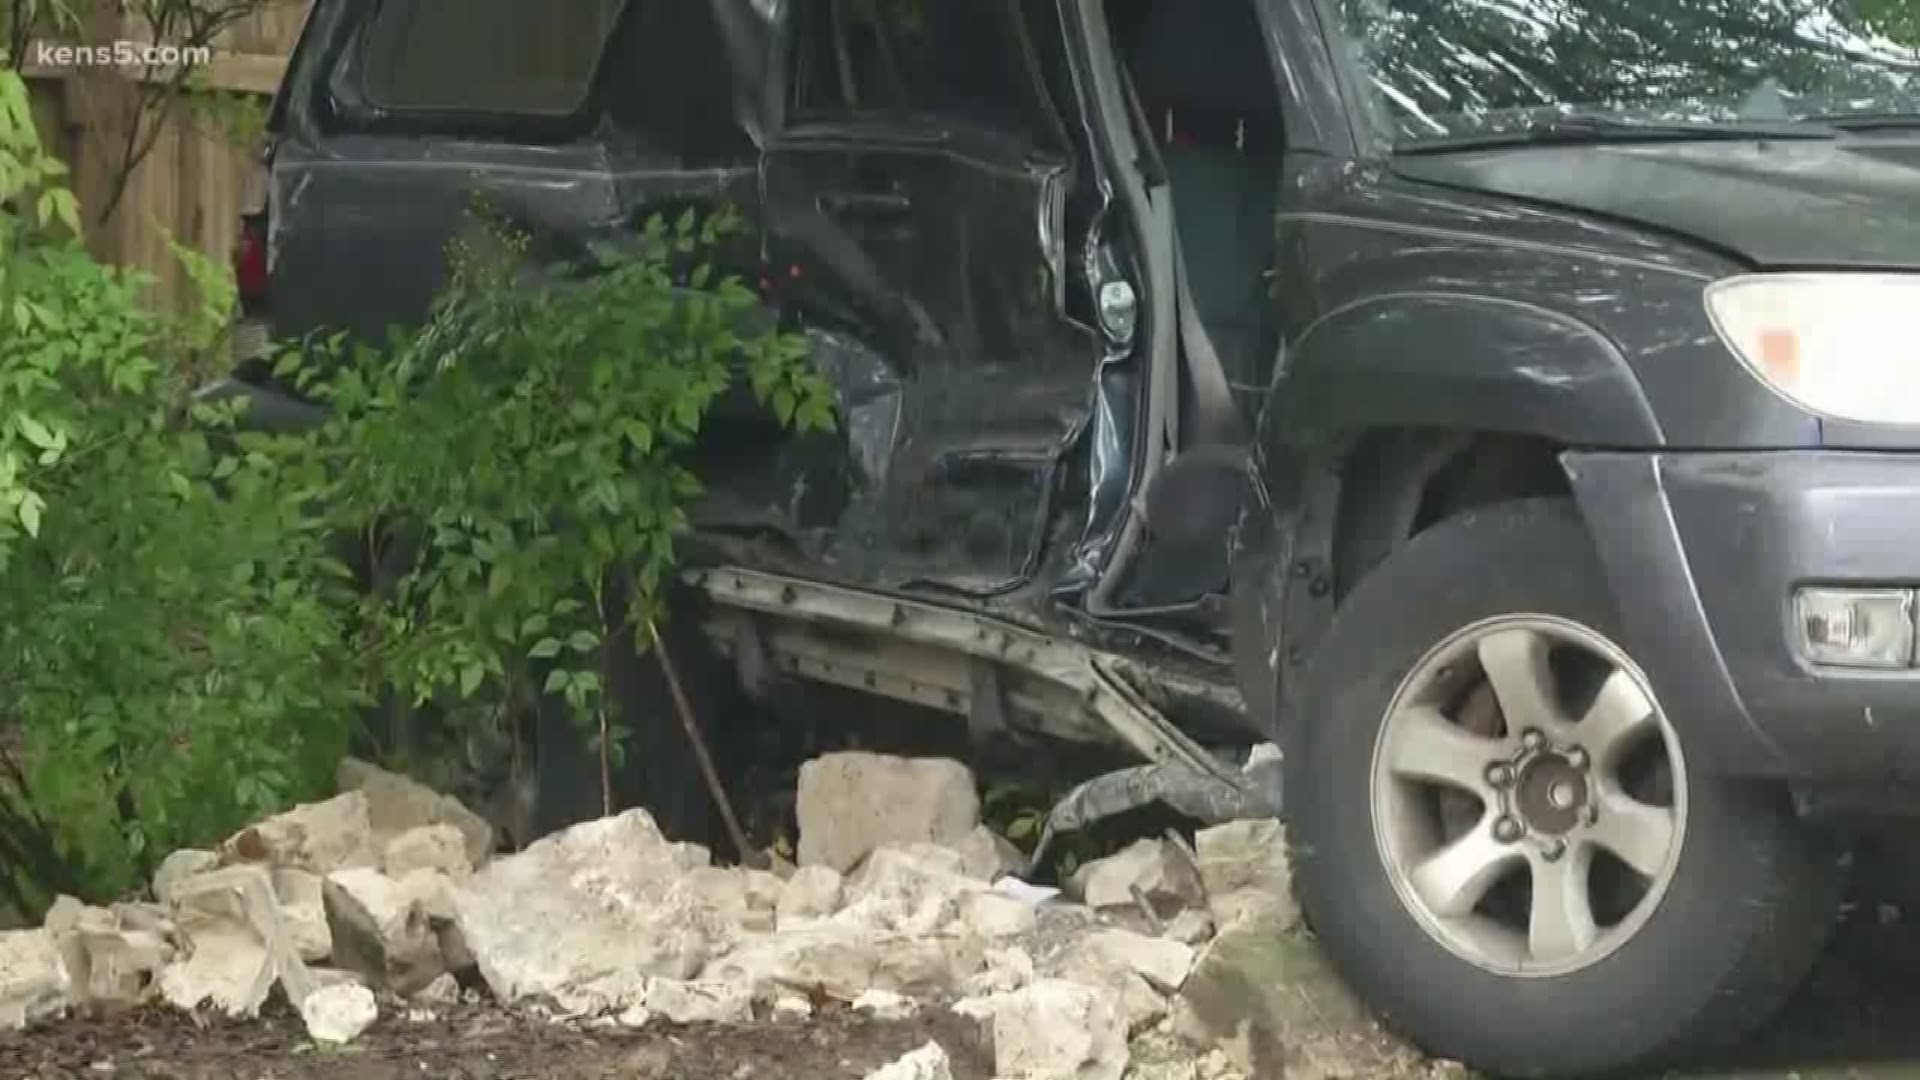 A Jeep crashed into a school bus carrying around 60 students at Larkspur Elementary on Friday and two people have been sent to the hospital, according to NEISD.